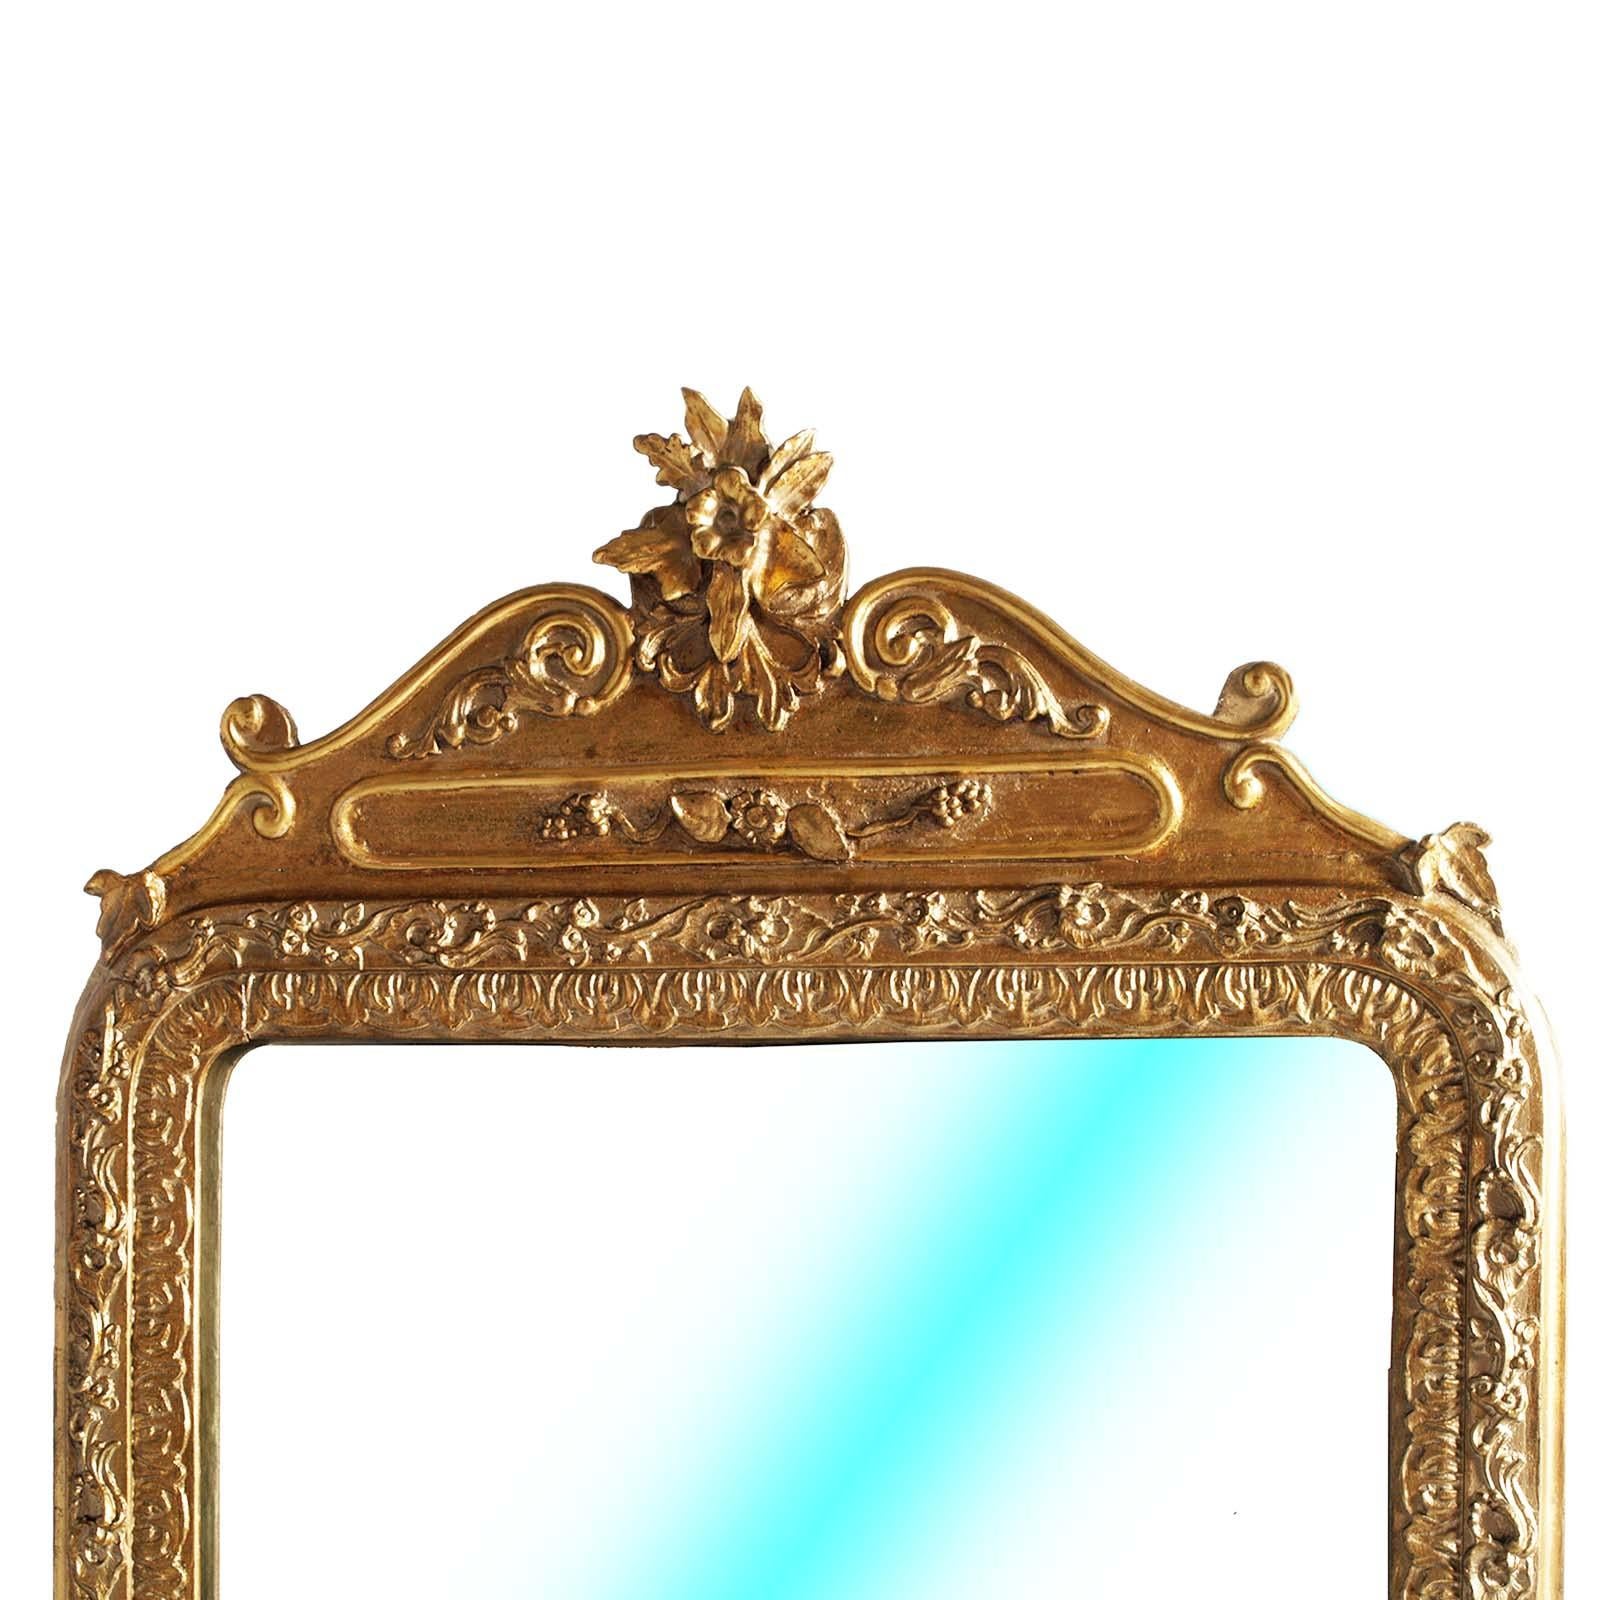 Abuot this mirror
Mirror attributable to the school of Andrea Brustolon
This Louis XIV period mirror features rich and diffuse elegantly carved motifs. They are floral motifs, the acanthus leaves, the geometric motifs. Everything is more delicate